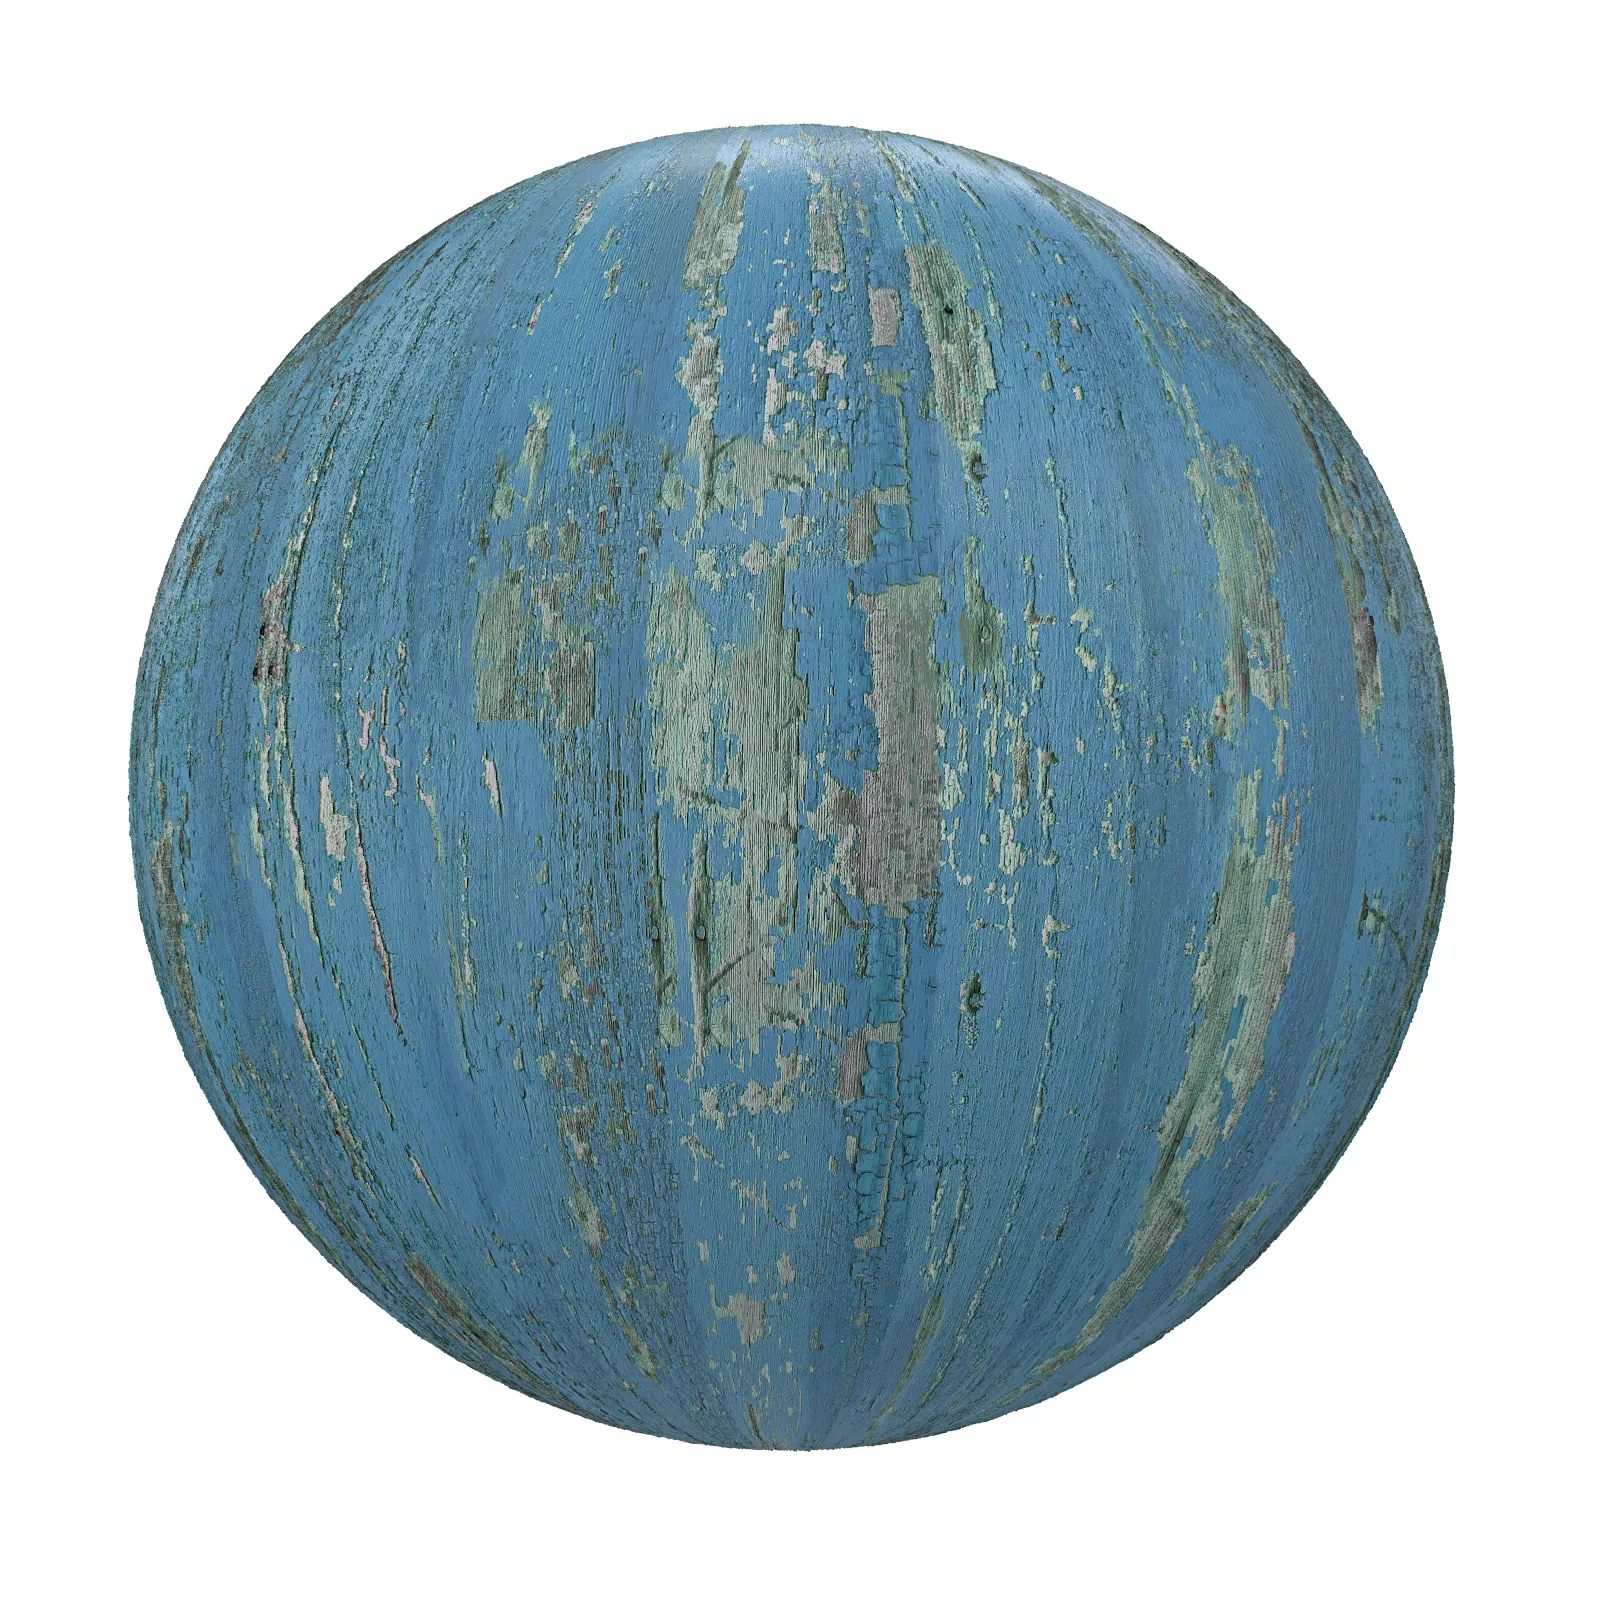 TEXTURES – WOOD – Blue Painted Wood 3